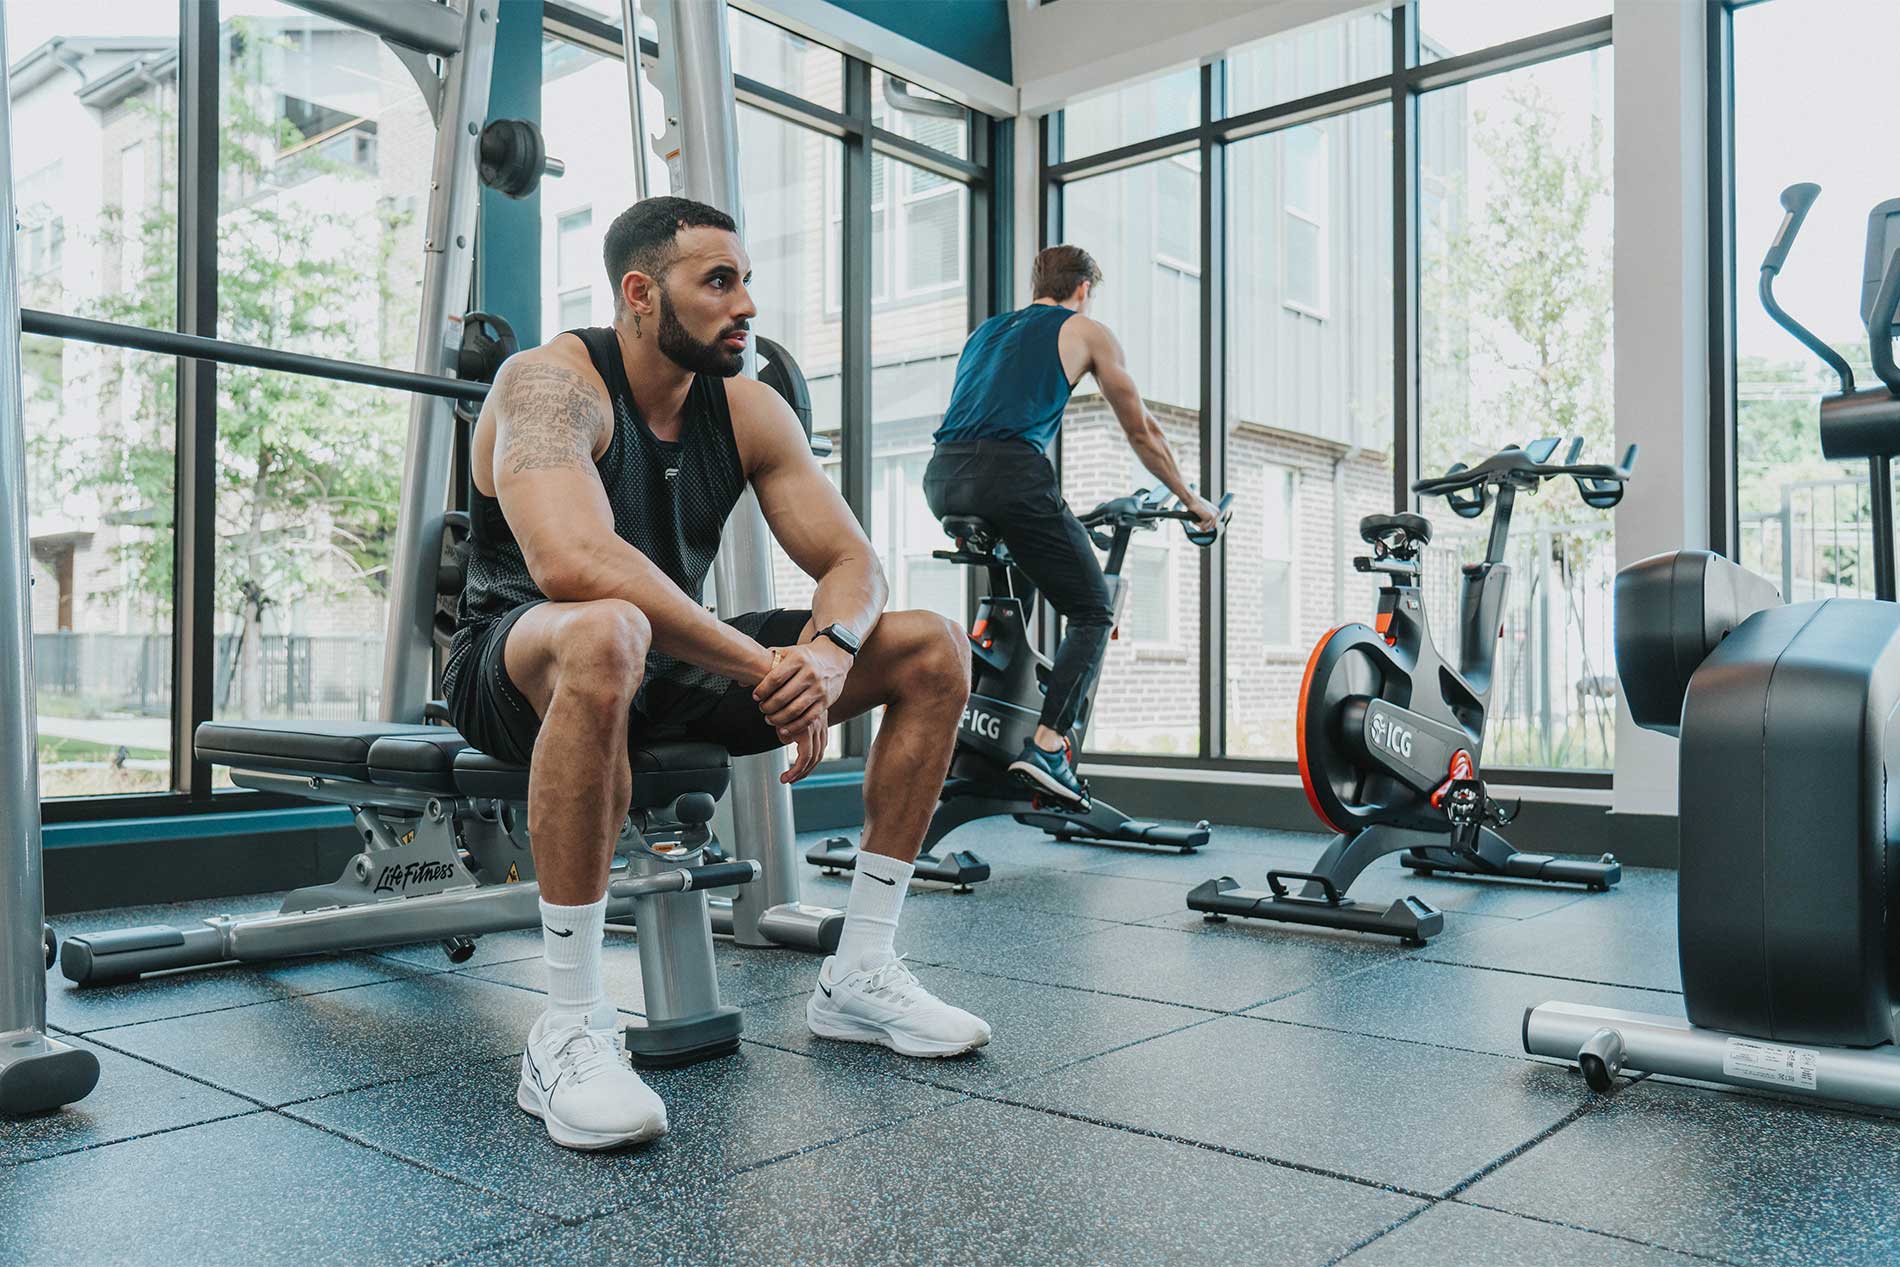 Two young men working out in fitness center